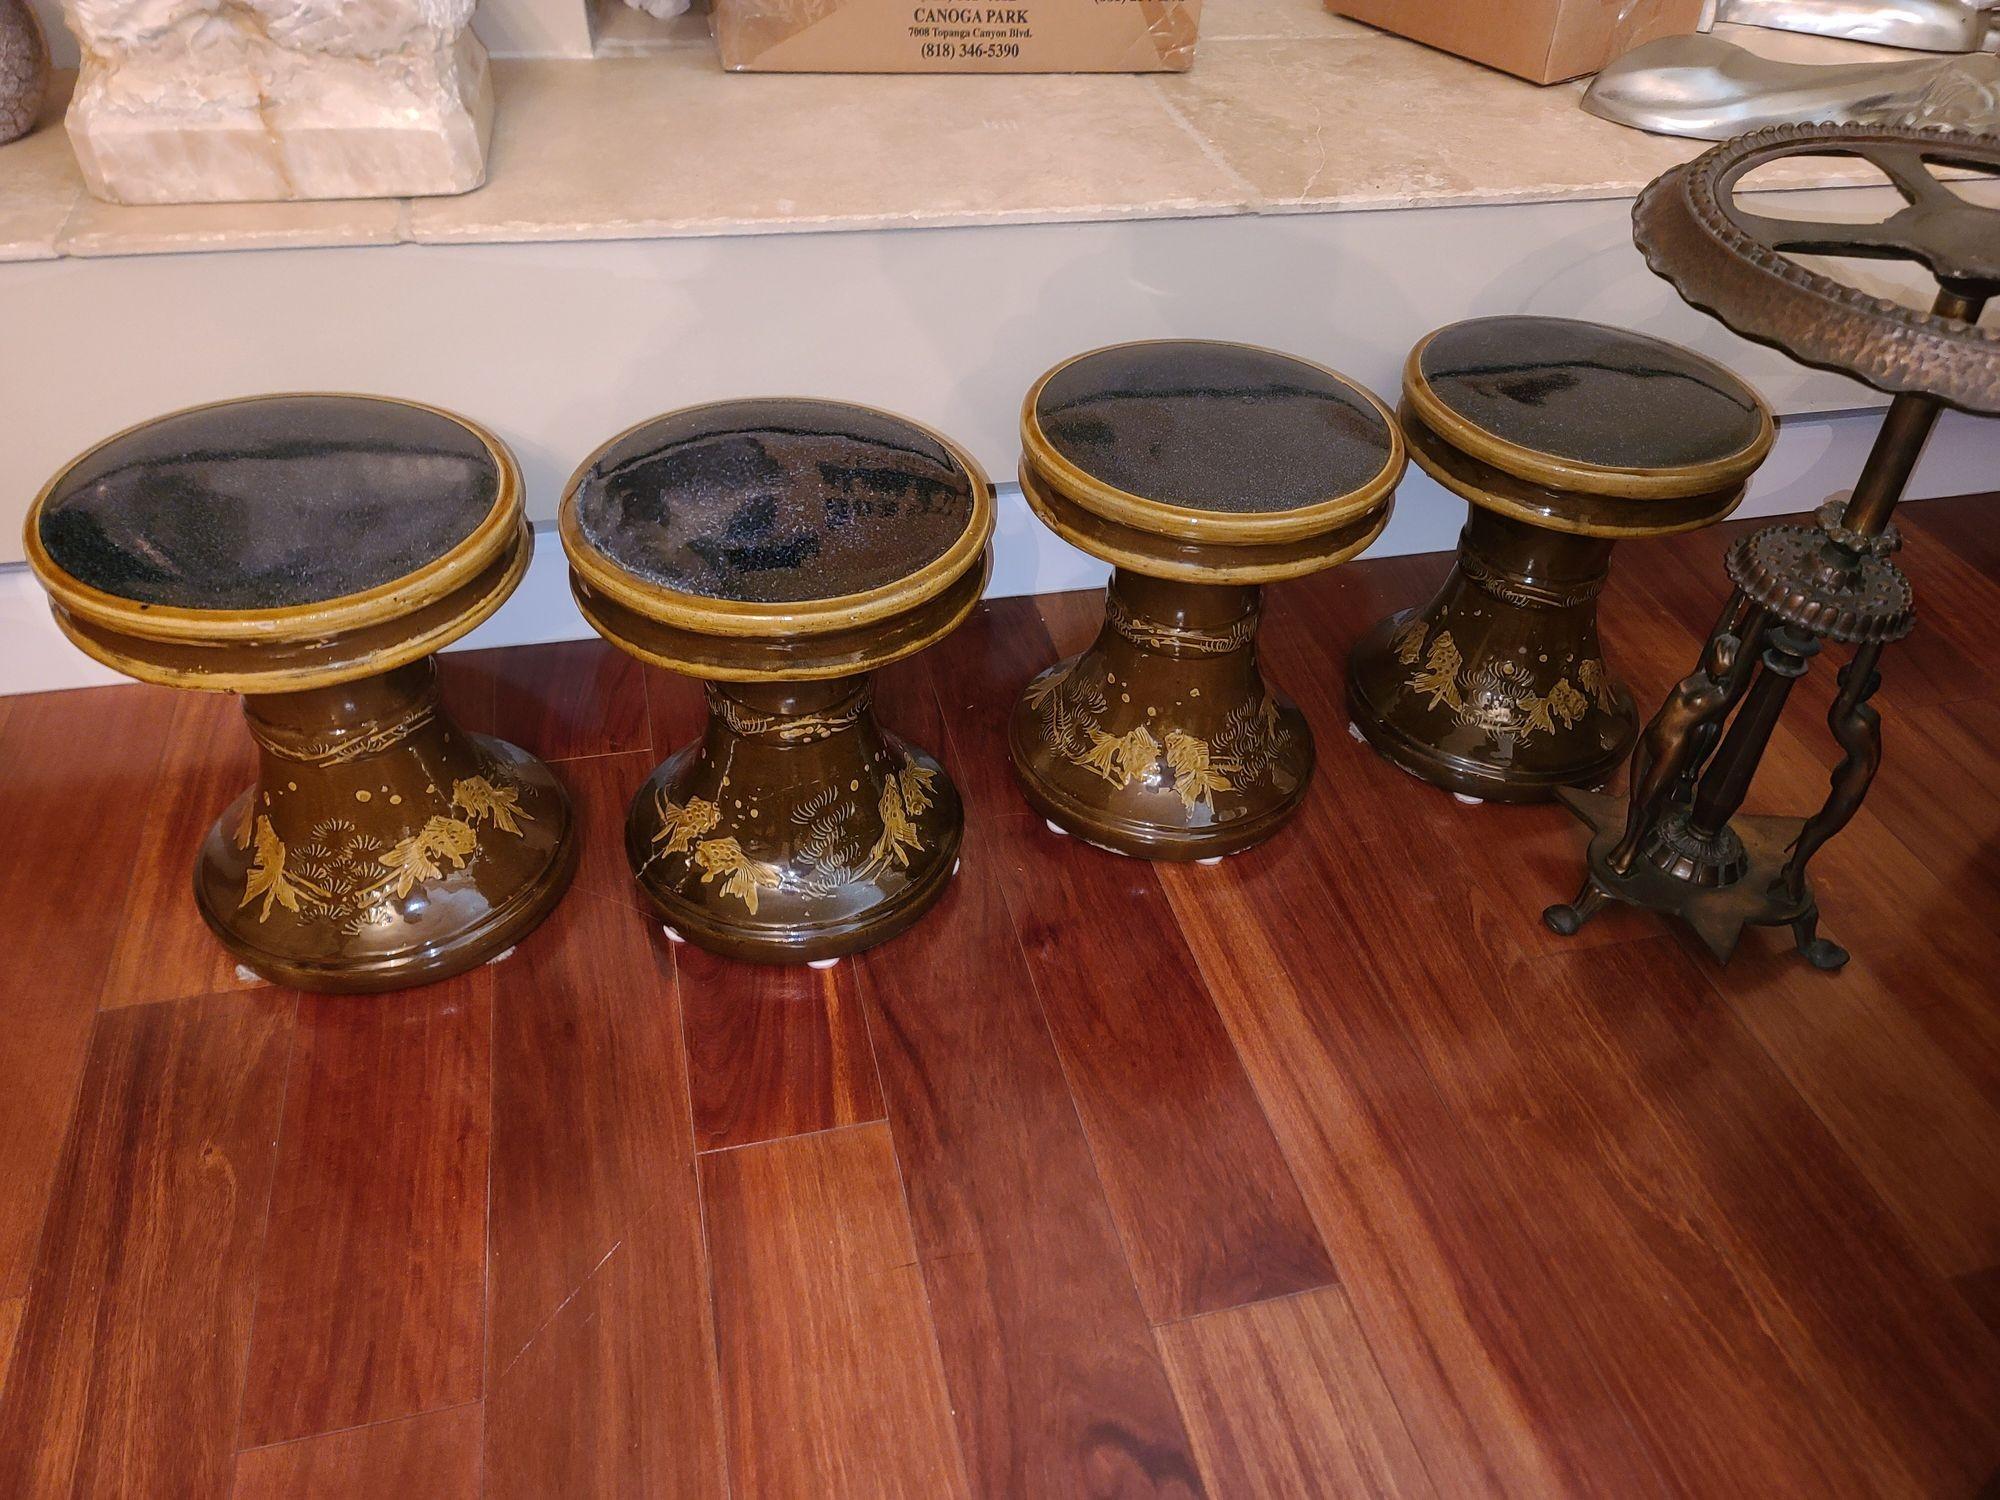 Original set of four 1970s California Pottery hour glass Garden Stools in a brown glaze with beige highlights featuring a relief of fish along the base of each stool.
1970, United States.